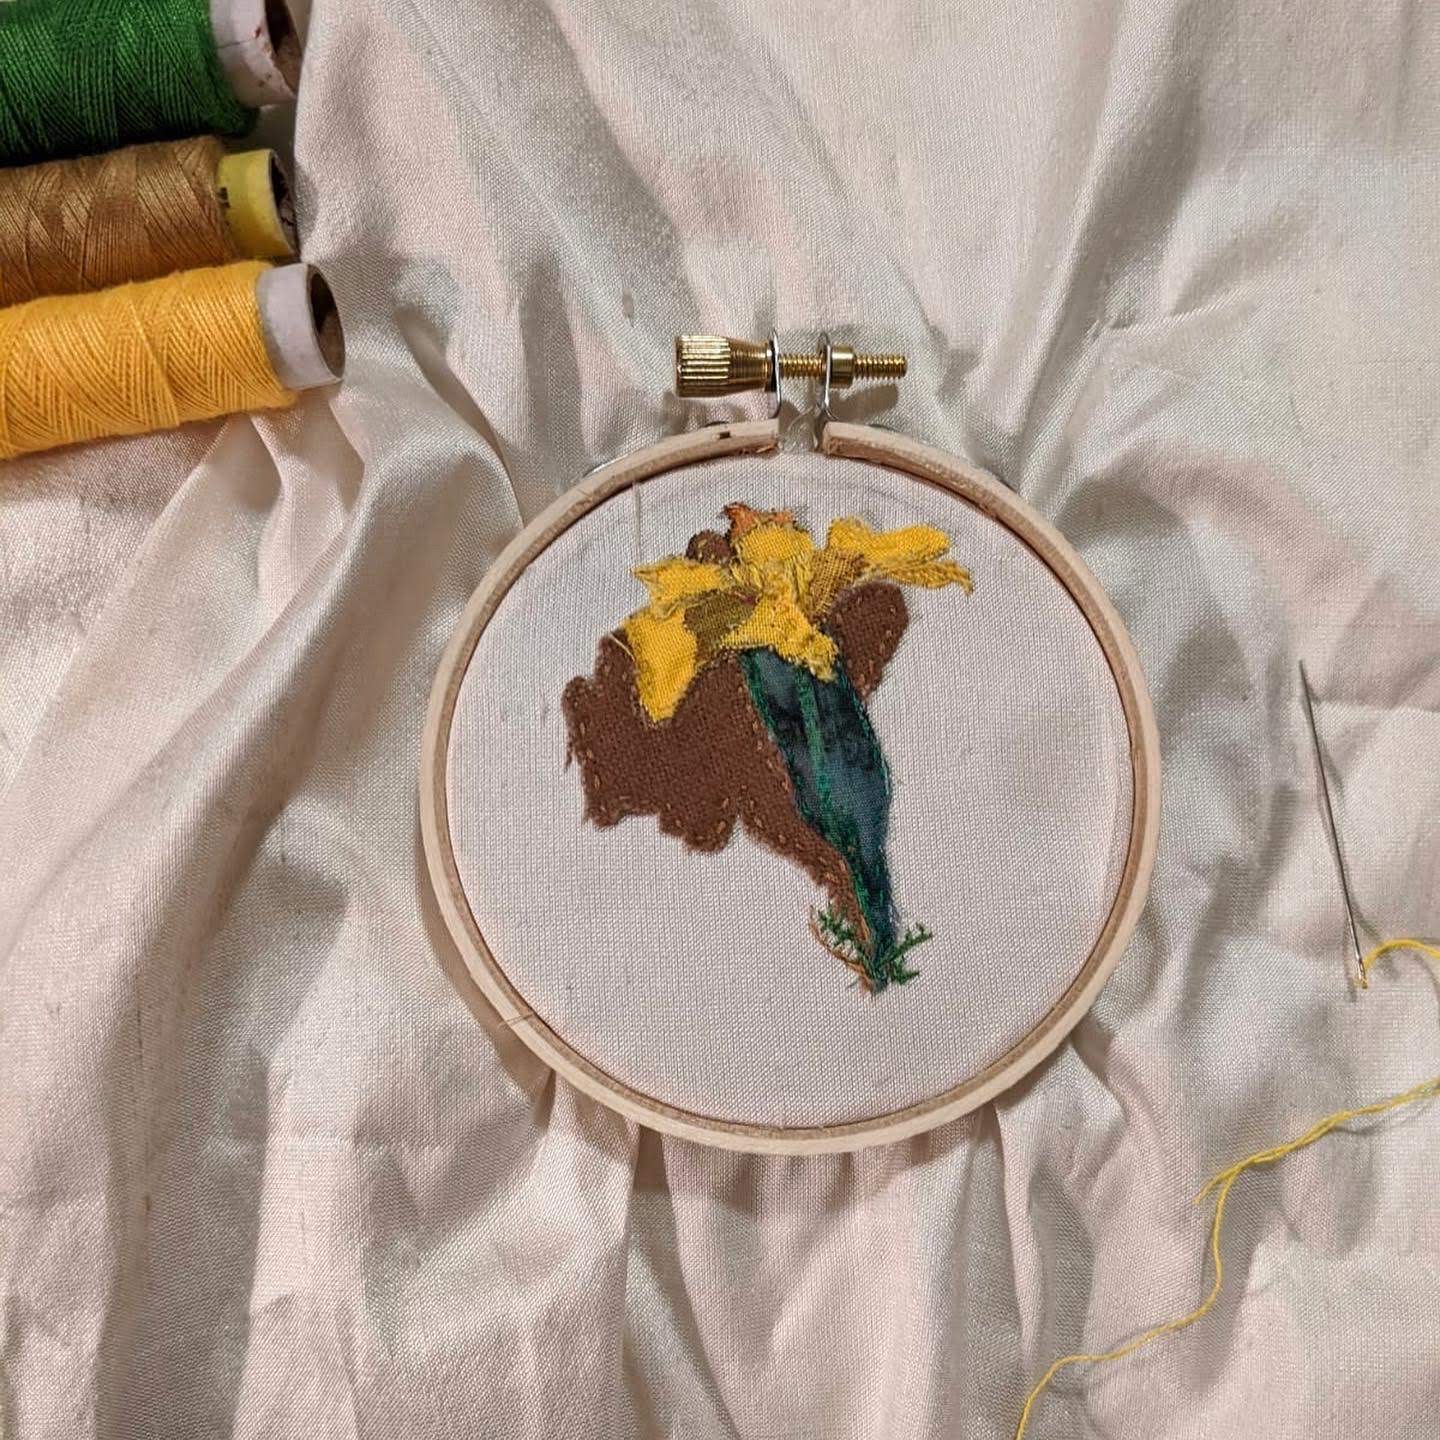 Embroidery photo of a marigold flower